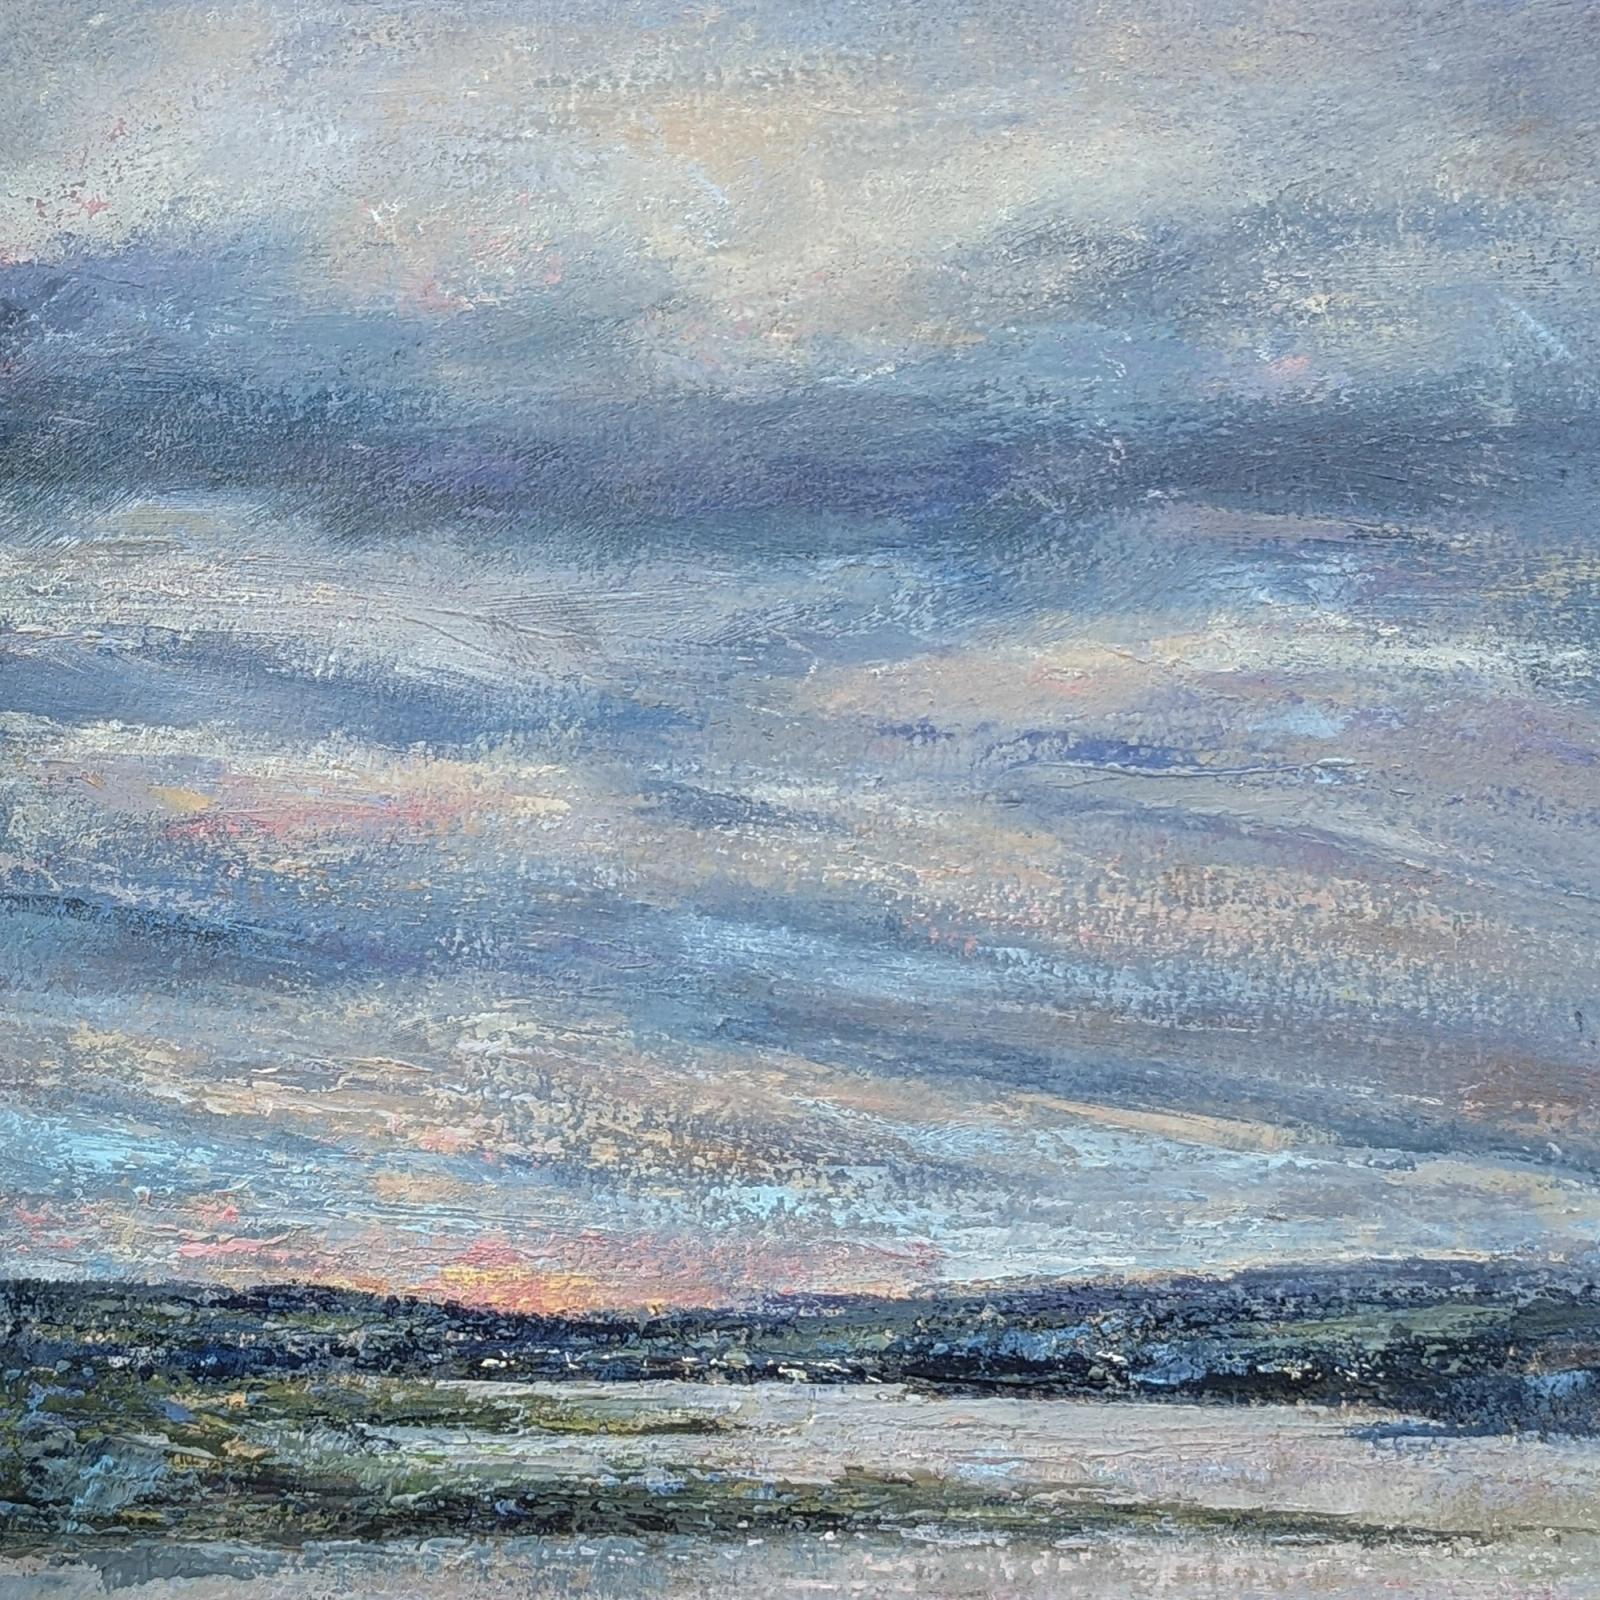 An oil painting on paper of an inlet on the ocean. There are soft clouds in the sky reflecting a pink sunset